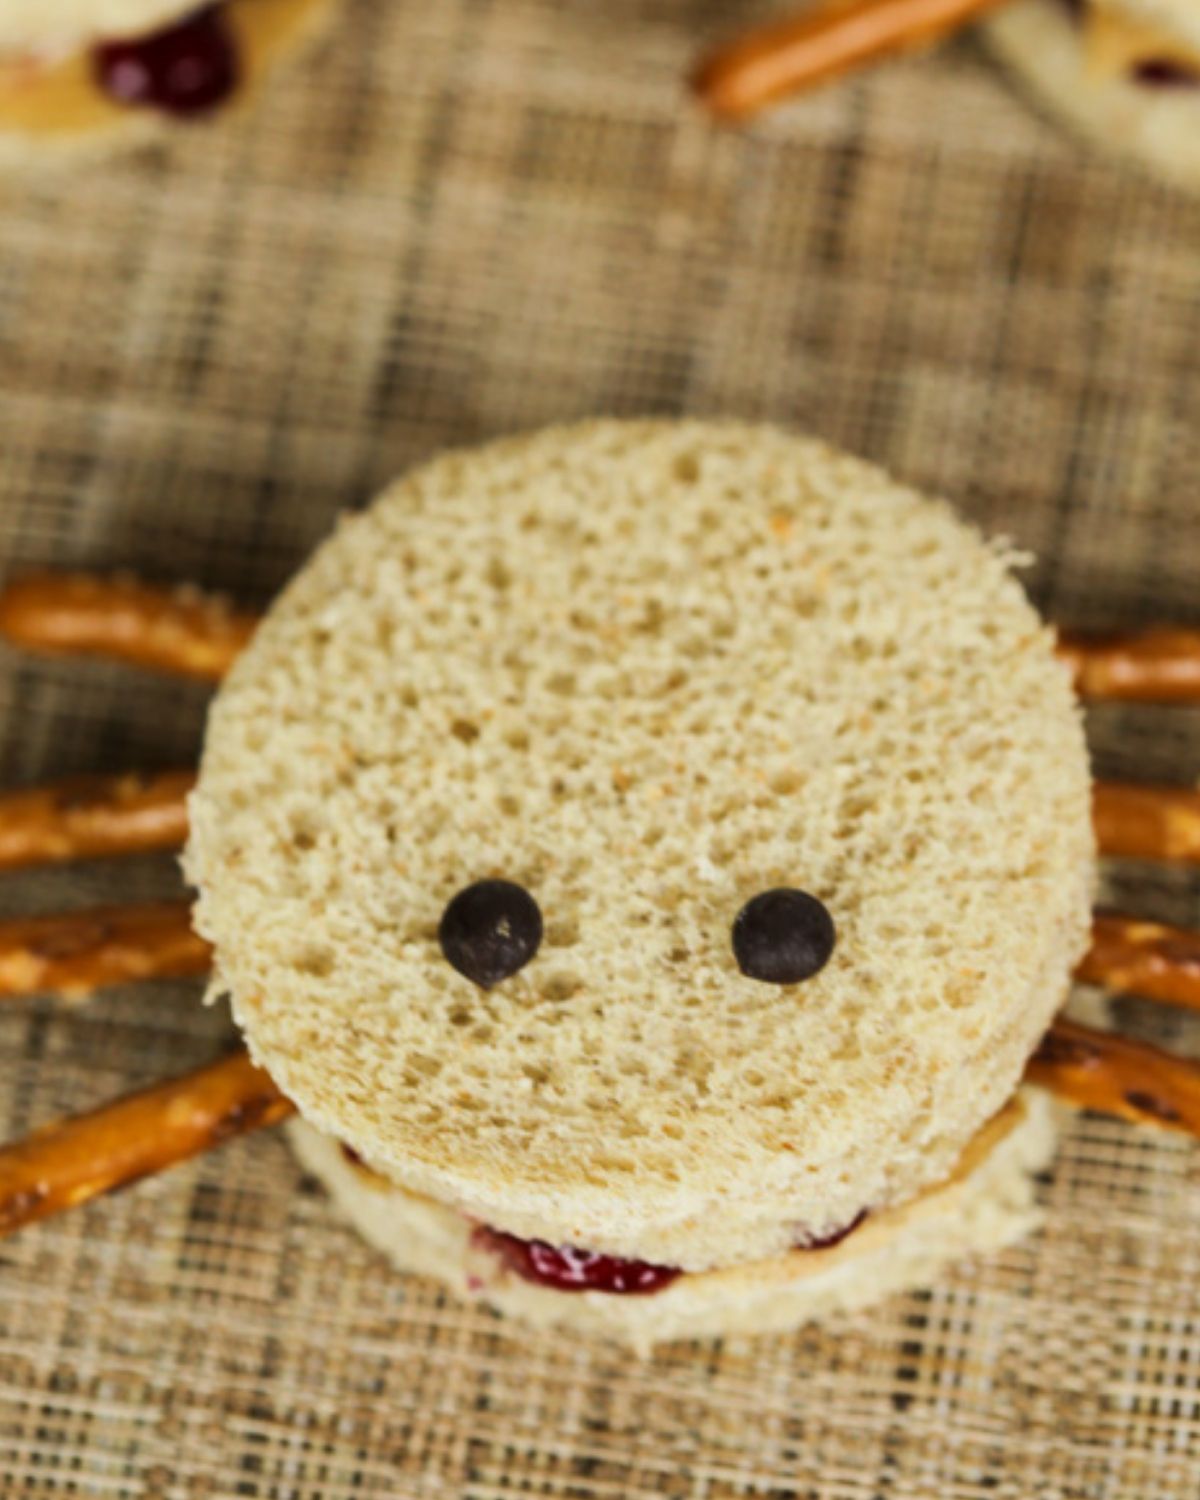 Spider Sandwiches in close up from the top.